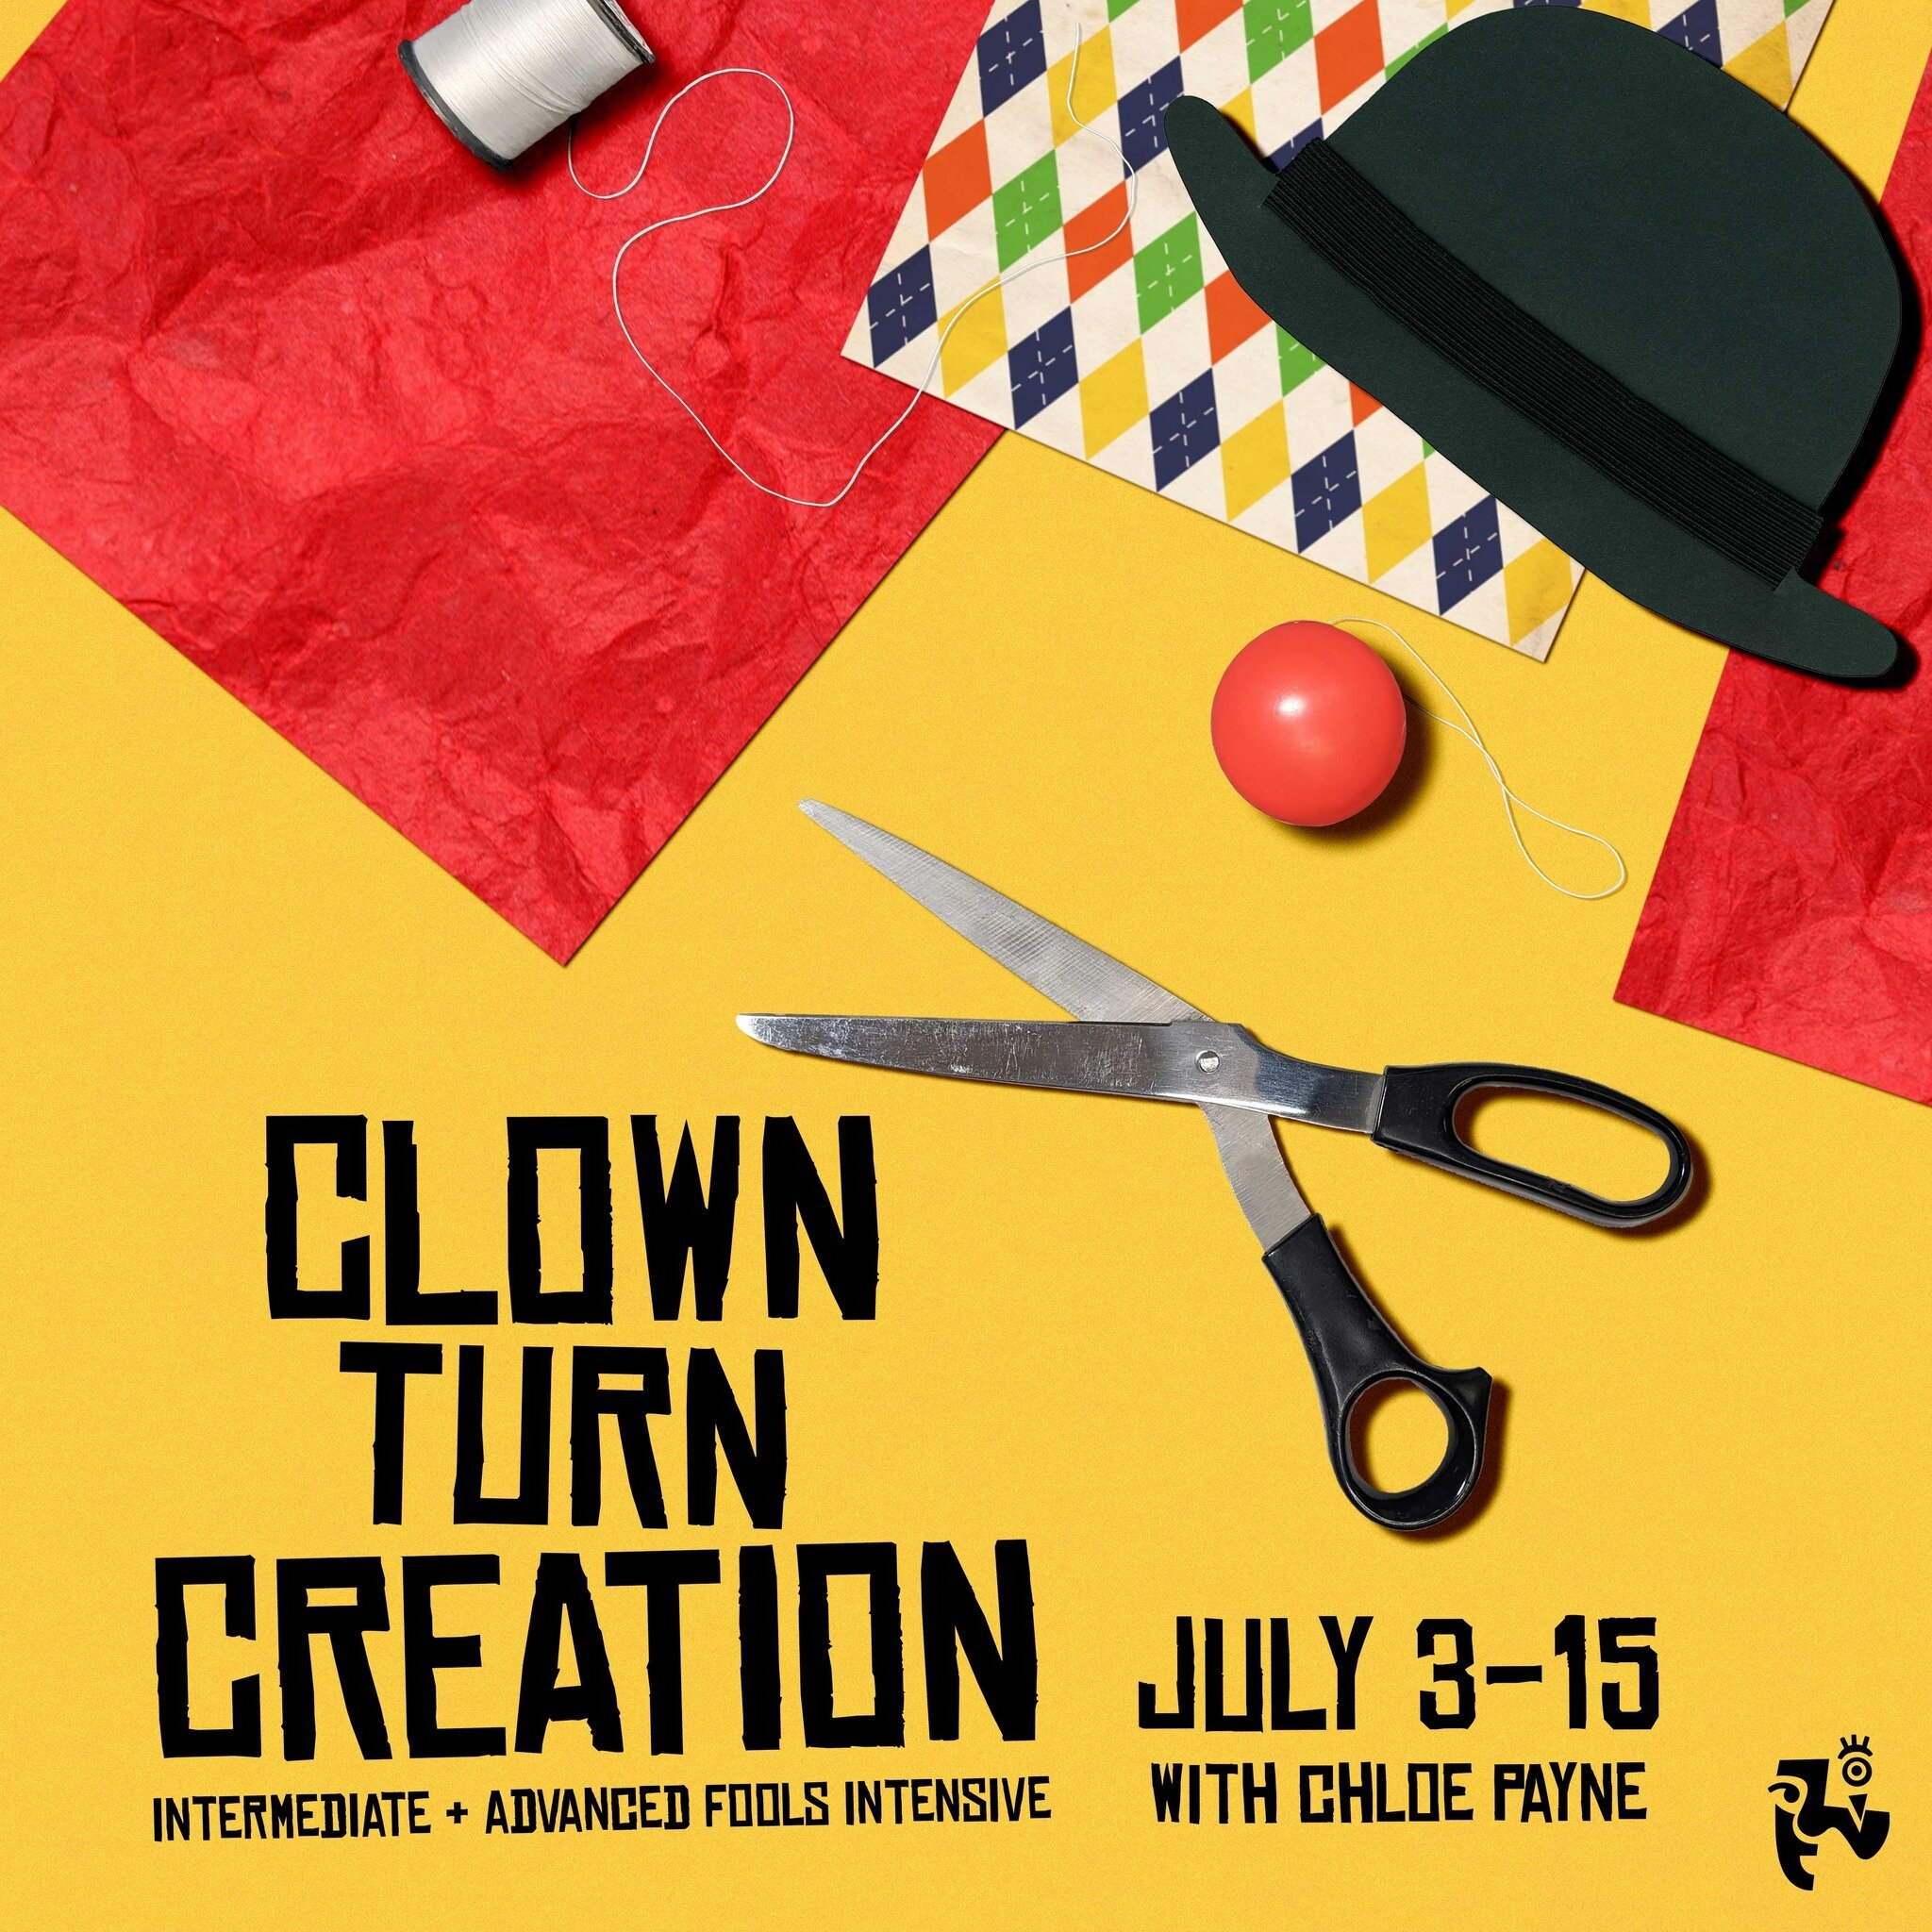 Register soon for our upcoming summer clowning workshop, Clown Turn Creation with Chloe Payne. ONLY 4 SPOTS LEFT! 🤡

Not sure what a clown turn is? It's a comedic performance piece using clowning, physical comedy, and improvisation that can appear i